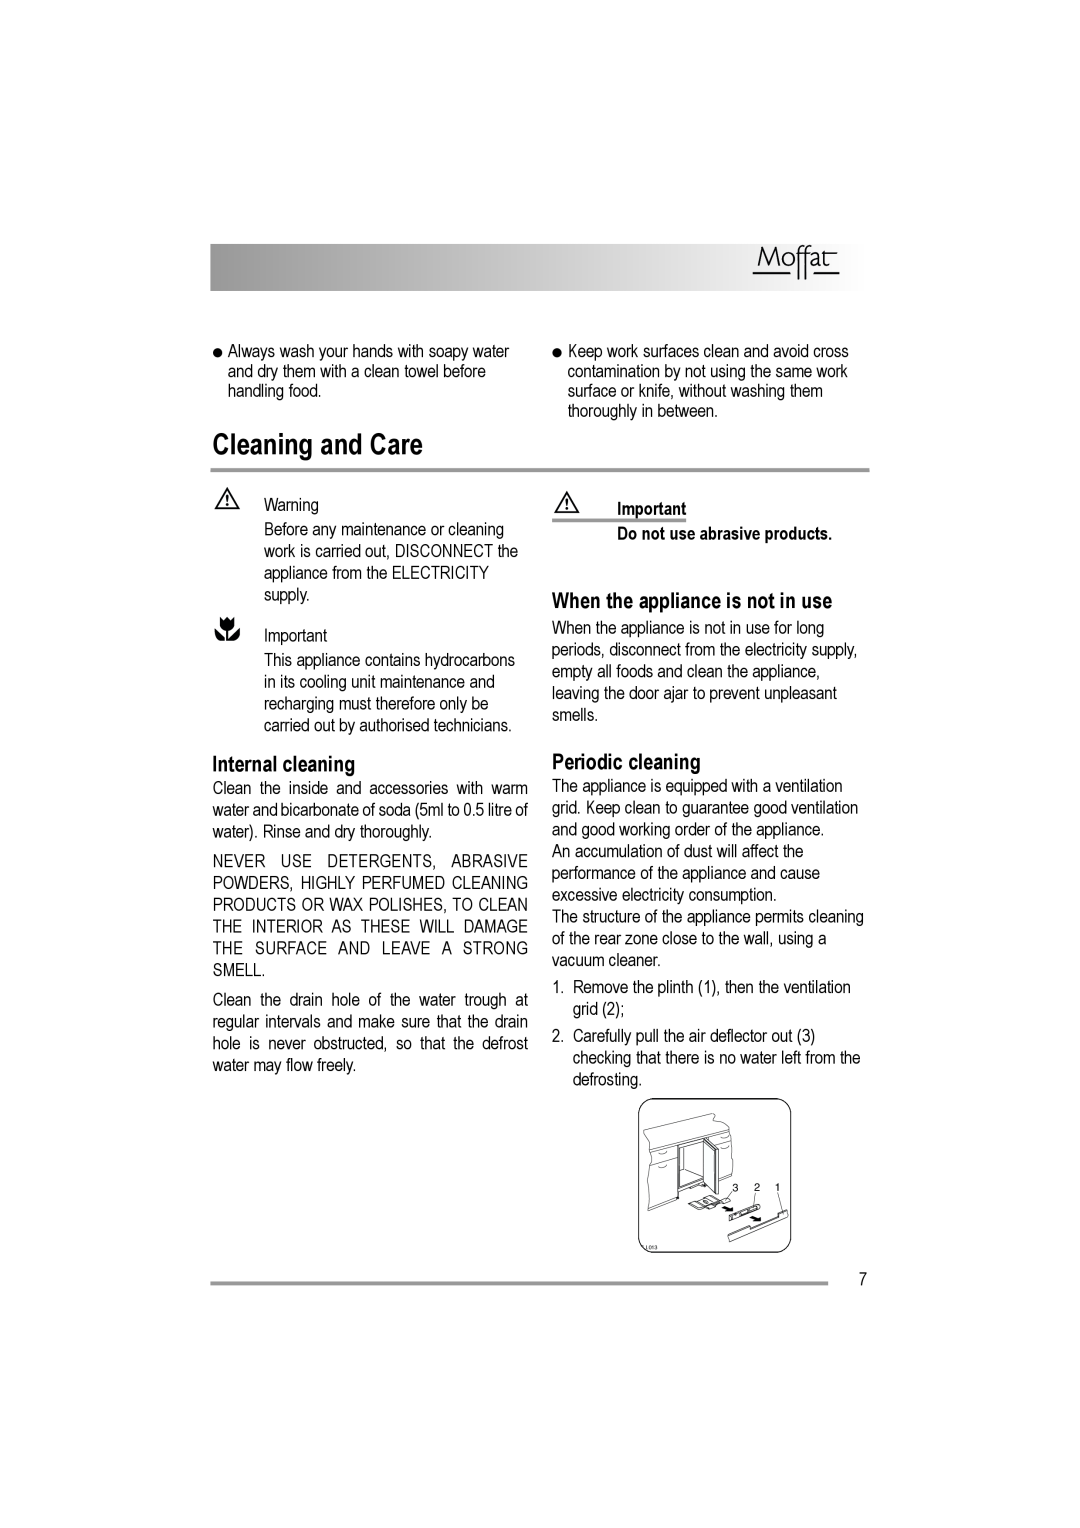 Moffat MUL 514 user manual Cleaning and Care, When the appliance is not in use, Internal cleaning, Periodic cleaning 